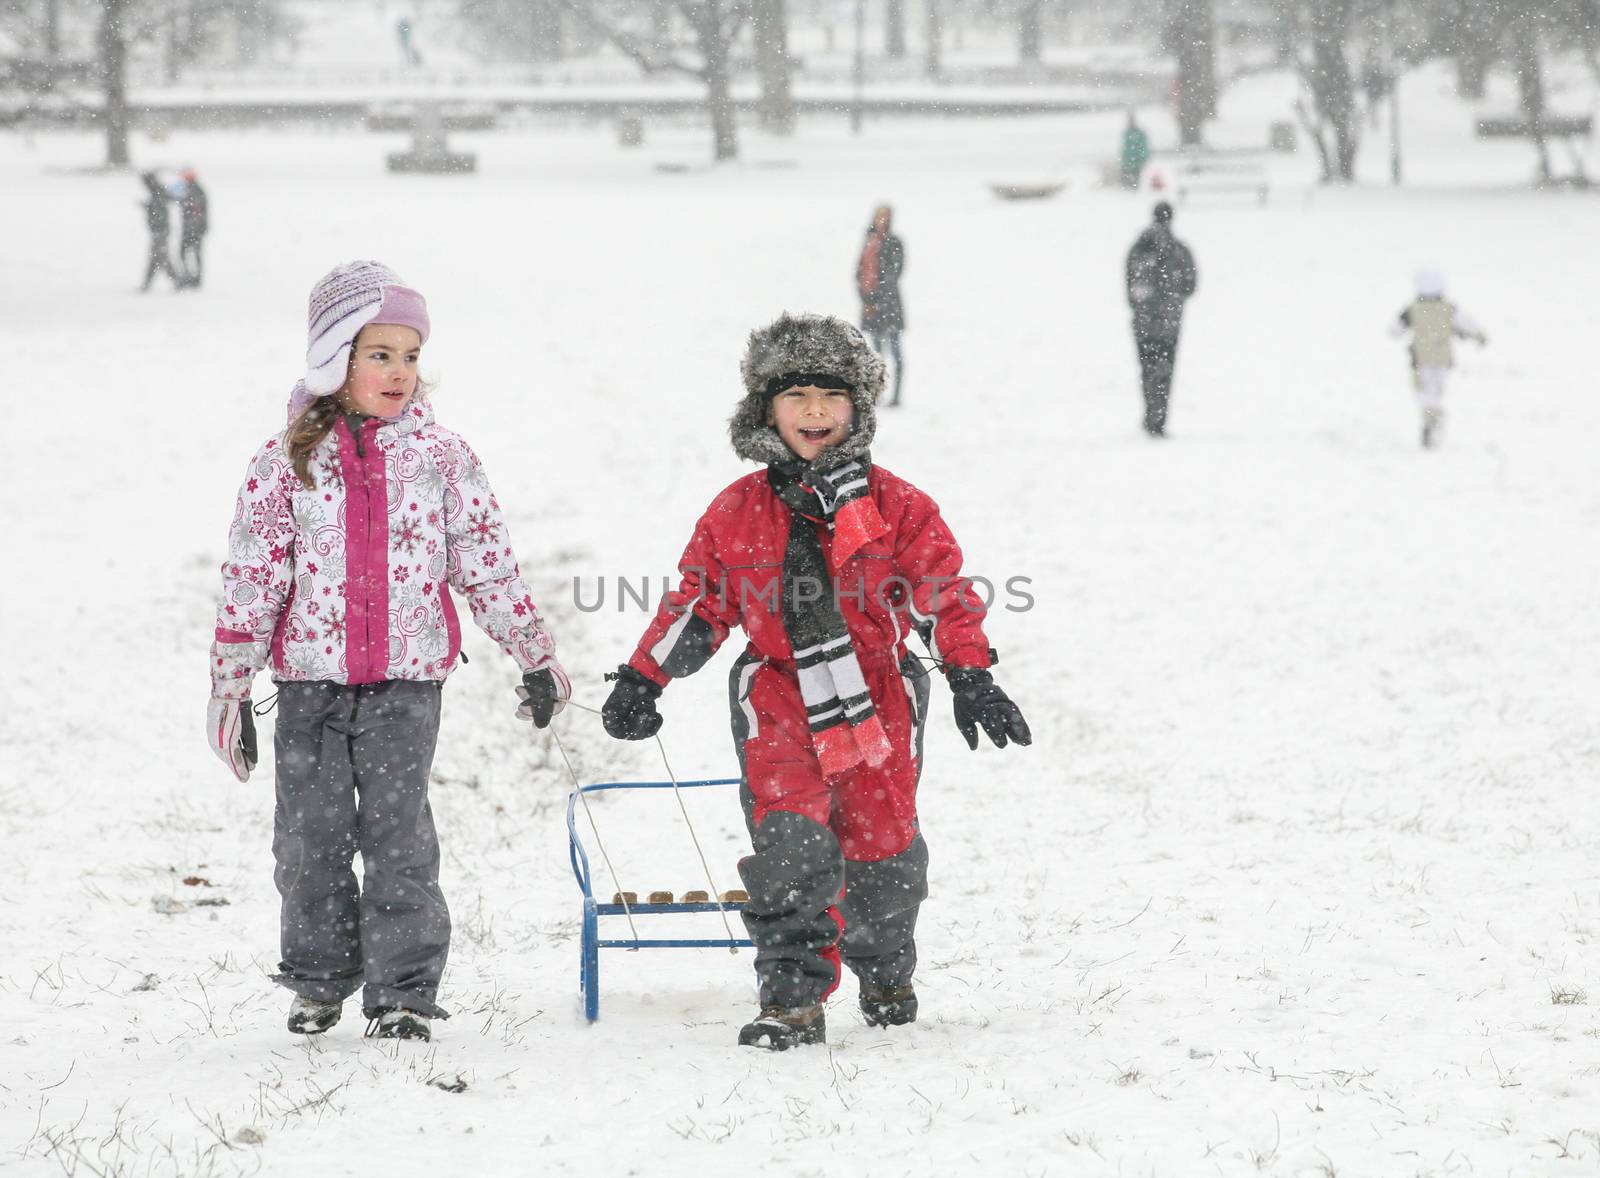 Two happy kids are pulling a sled in the snow during a cold winter day.